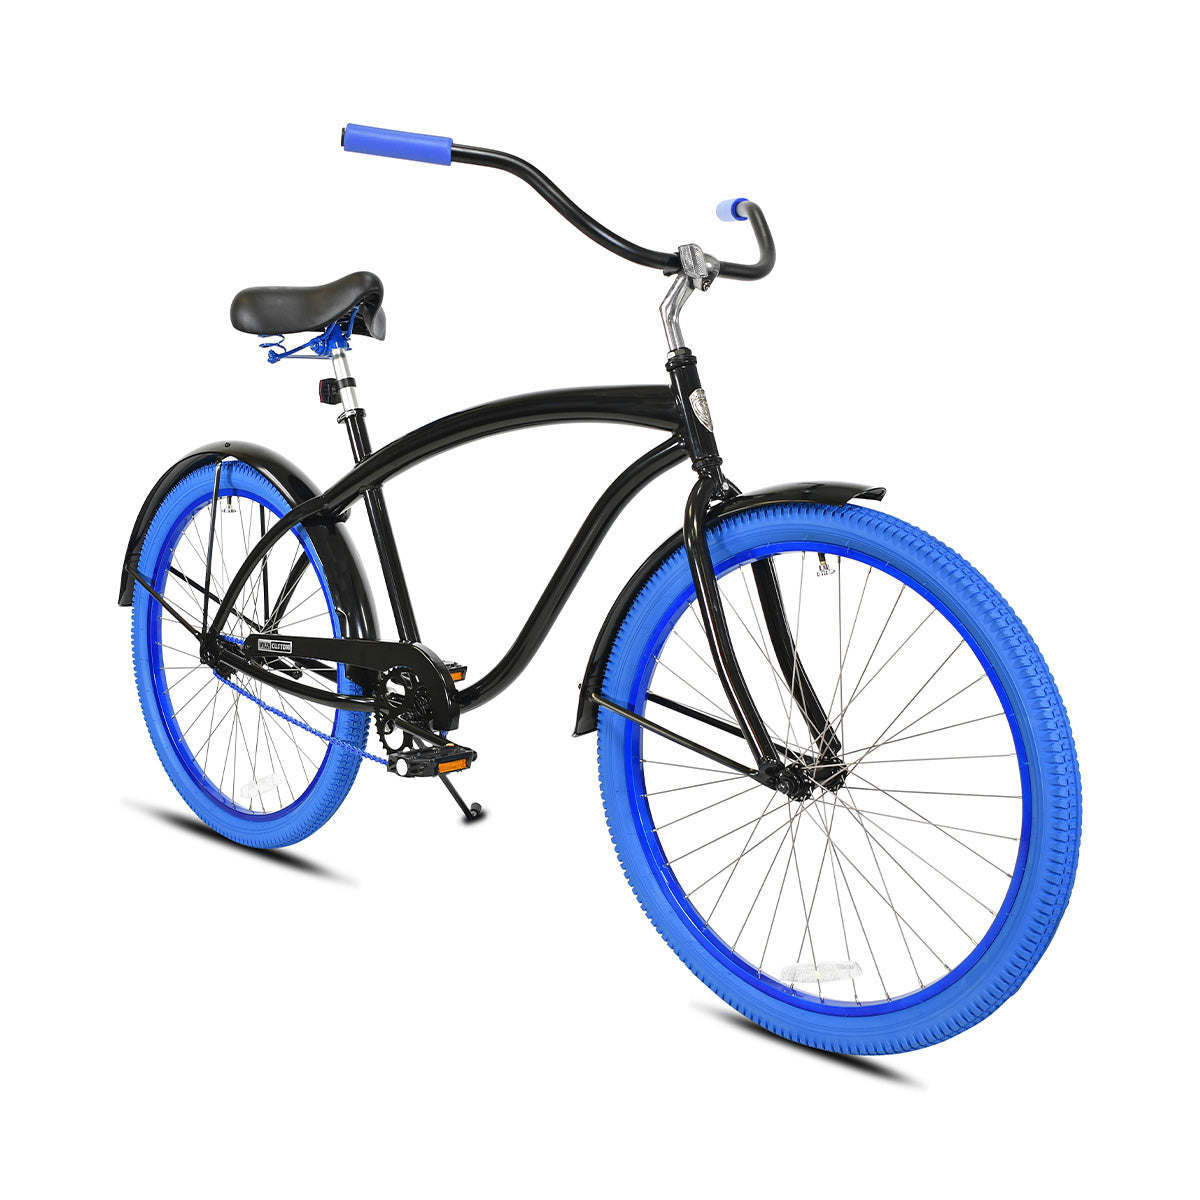 Rob Single-Speed Cruiser Black Step-Over Frame, Handlebar, Fenders, and Saddle with Blue Grips, Chain, Tires, and Wheels with Silver Spokes